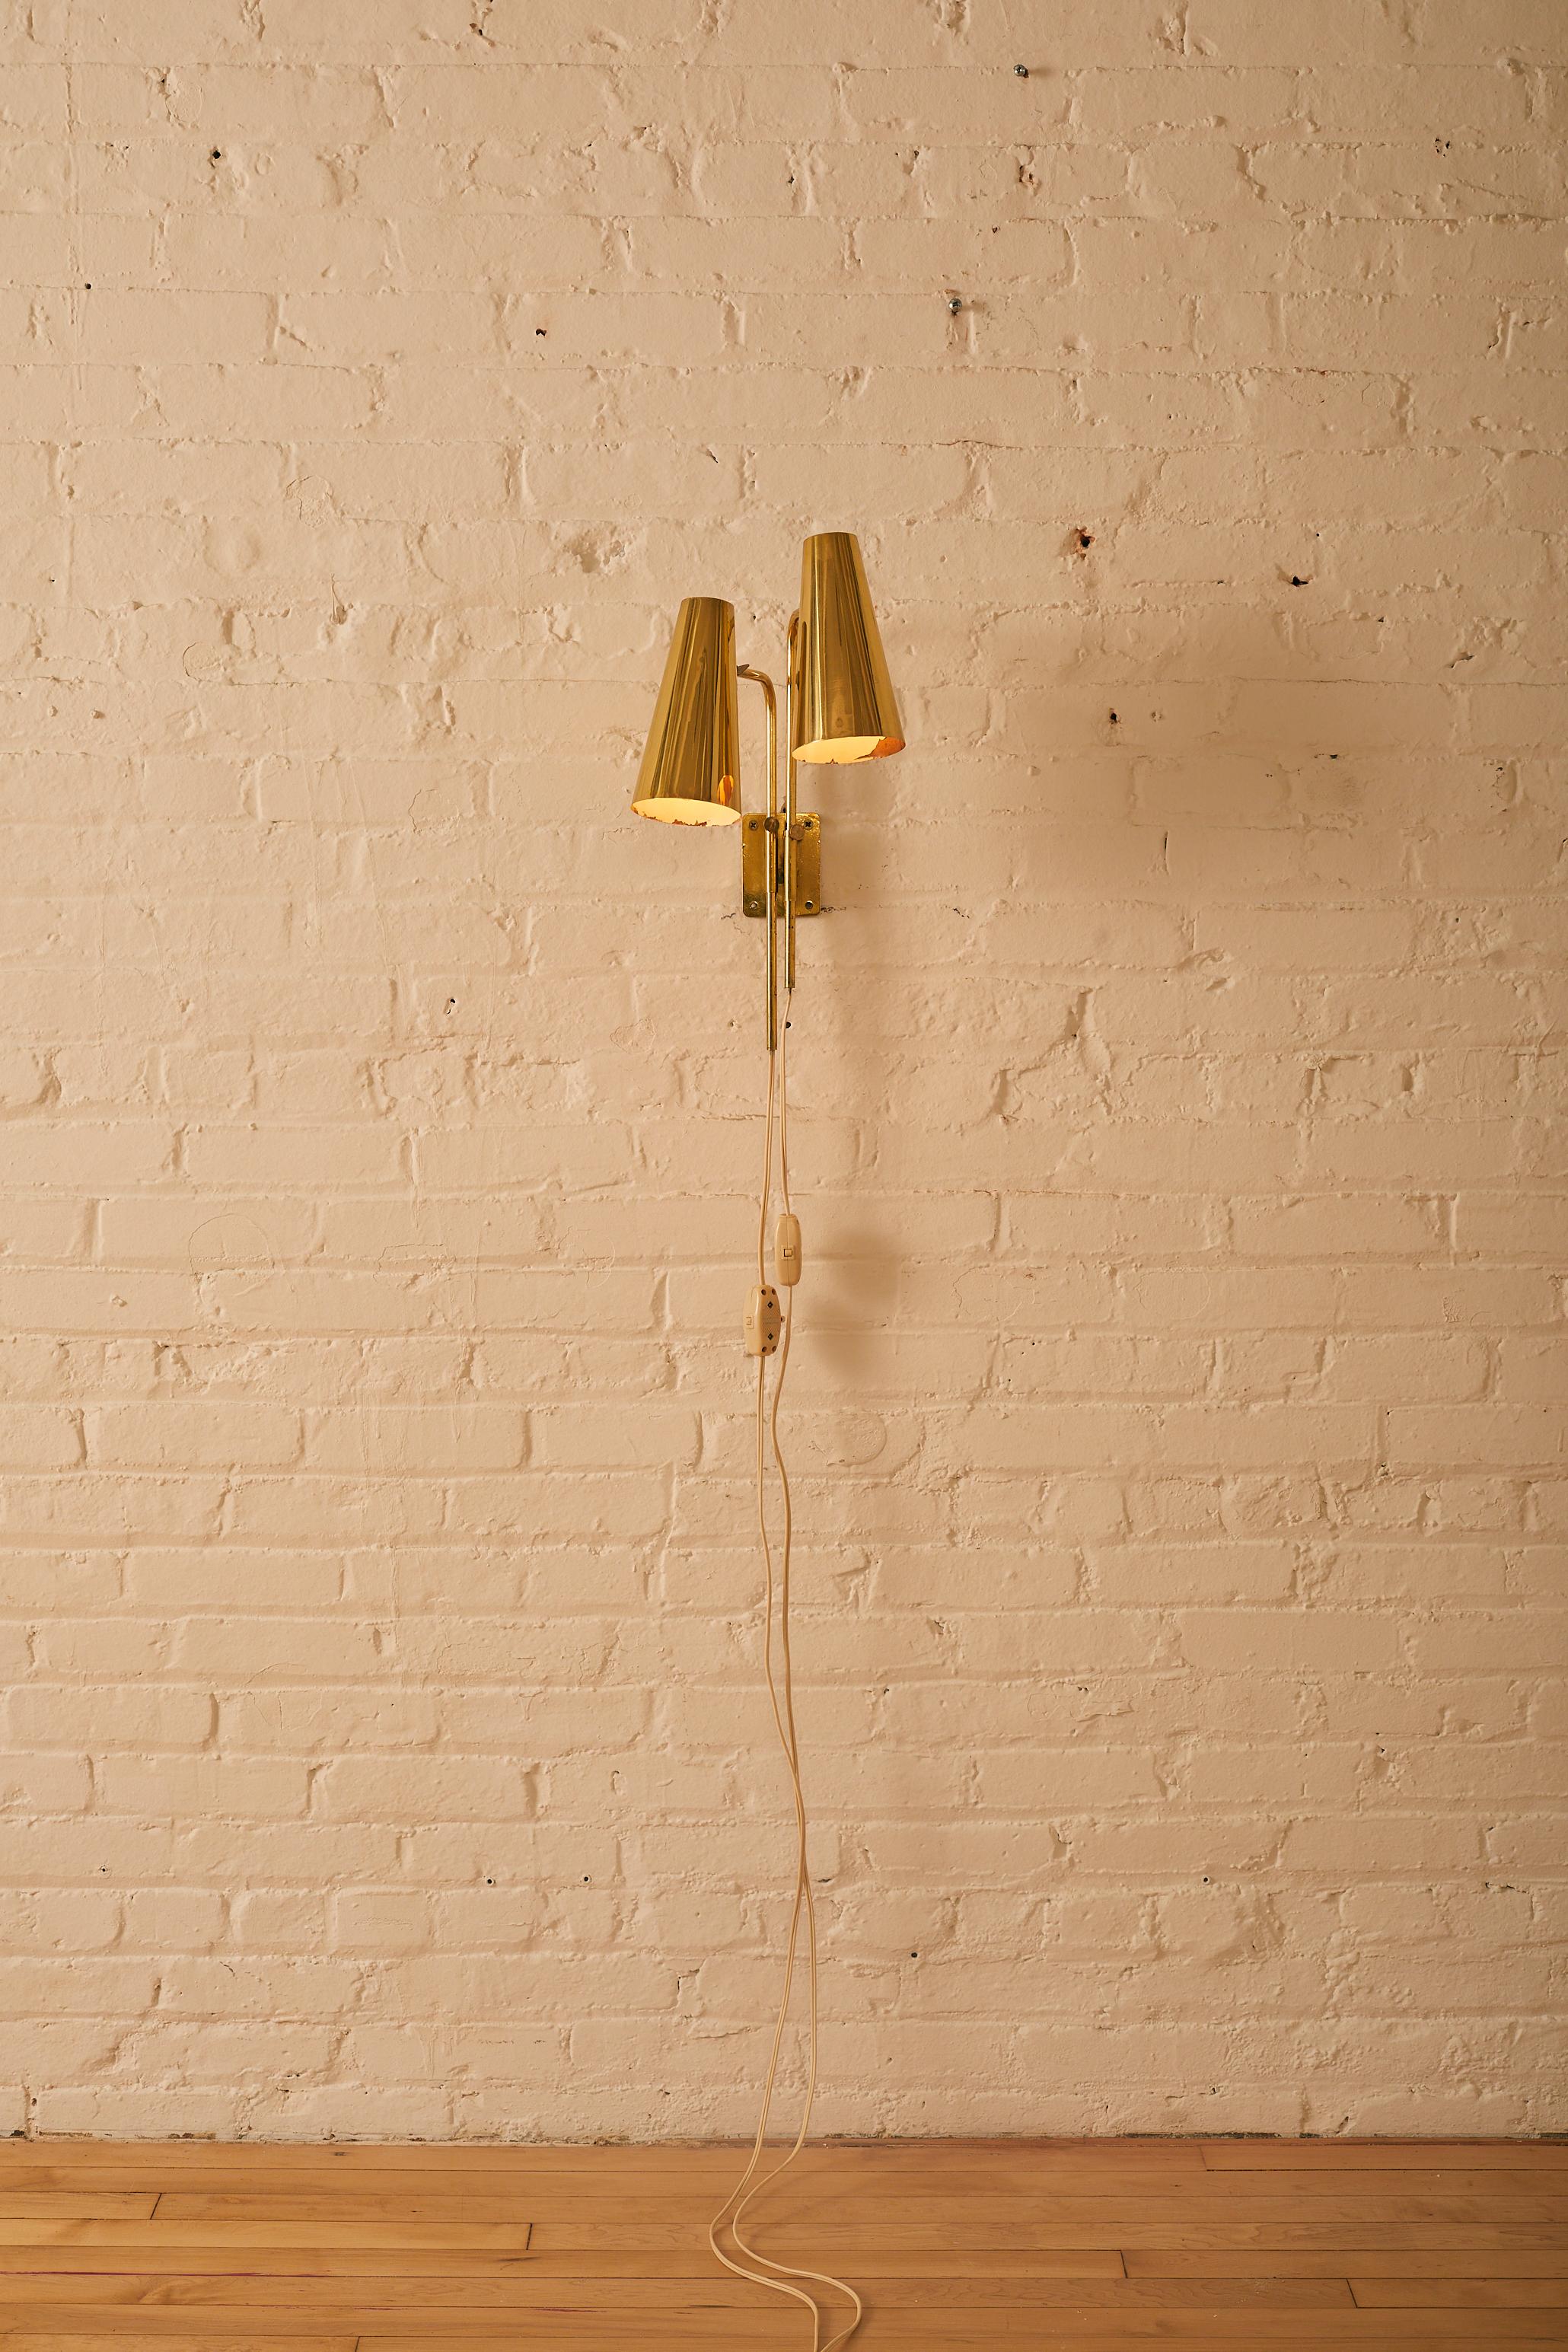 Double Headed Wall Sconce by  Paavo Tynell

About Paavo Tynell: 

Paavo Tynell (1890-1973) was an industrial designer, known as the great pioneer of Finnish lighting design and fondly dubbed as “the man who illuminated Finland”. Tyne was one of the